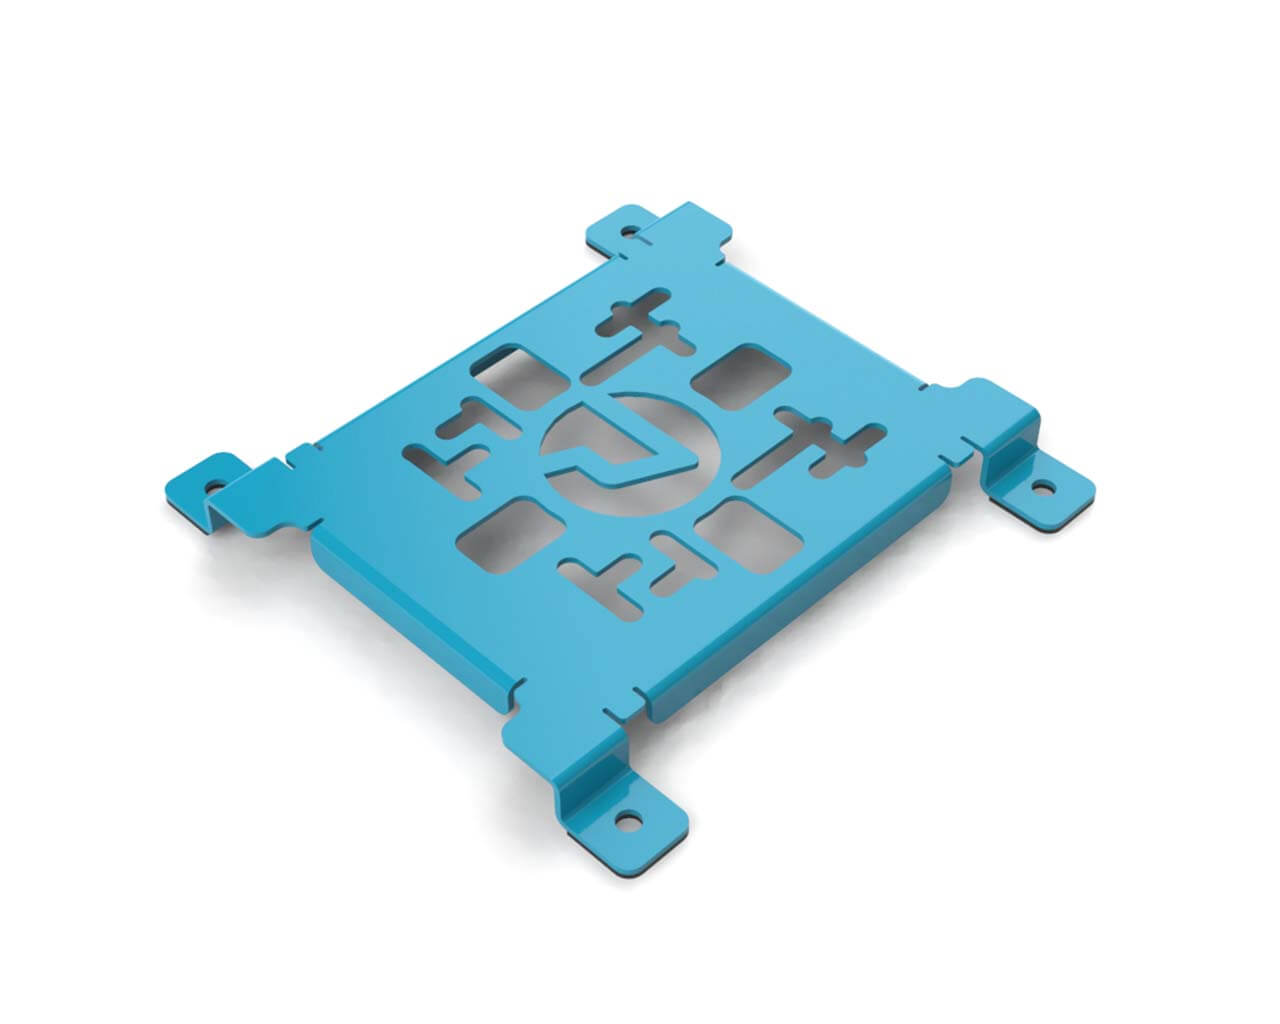 PrimoChill SX Spider Mount Bracket - 120mm Series - PrimoChill - KEEPING IT COOL Sky Blue